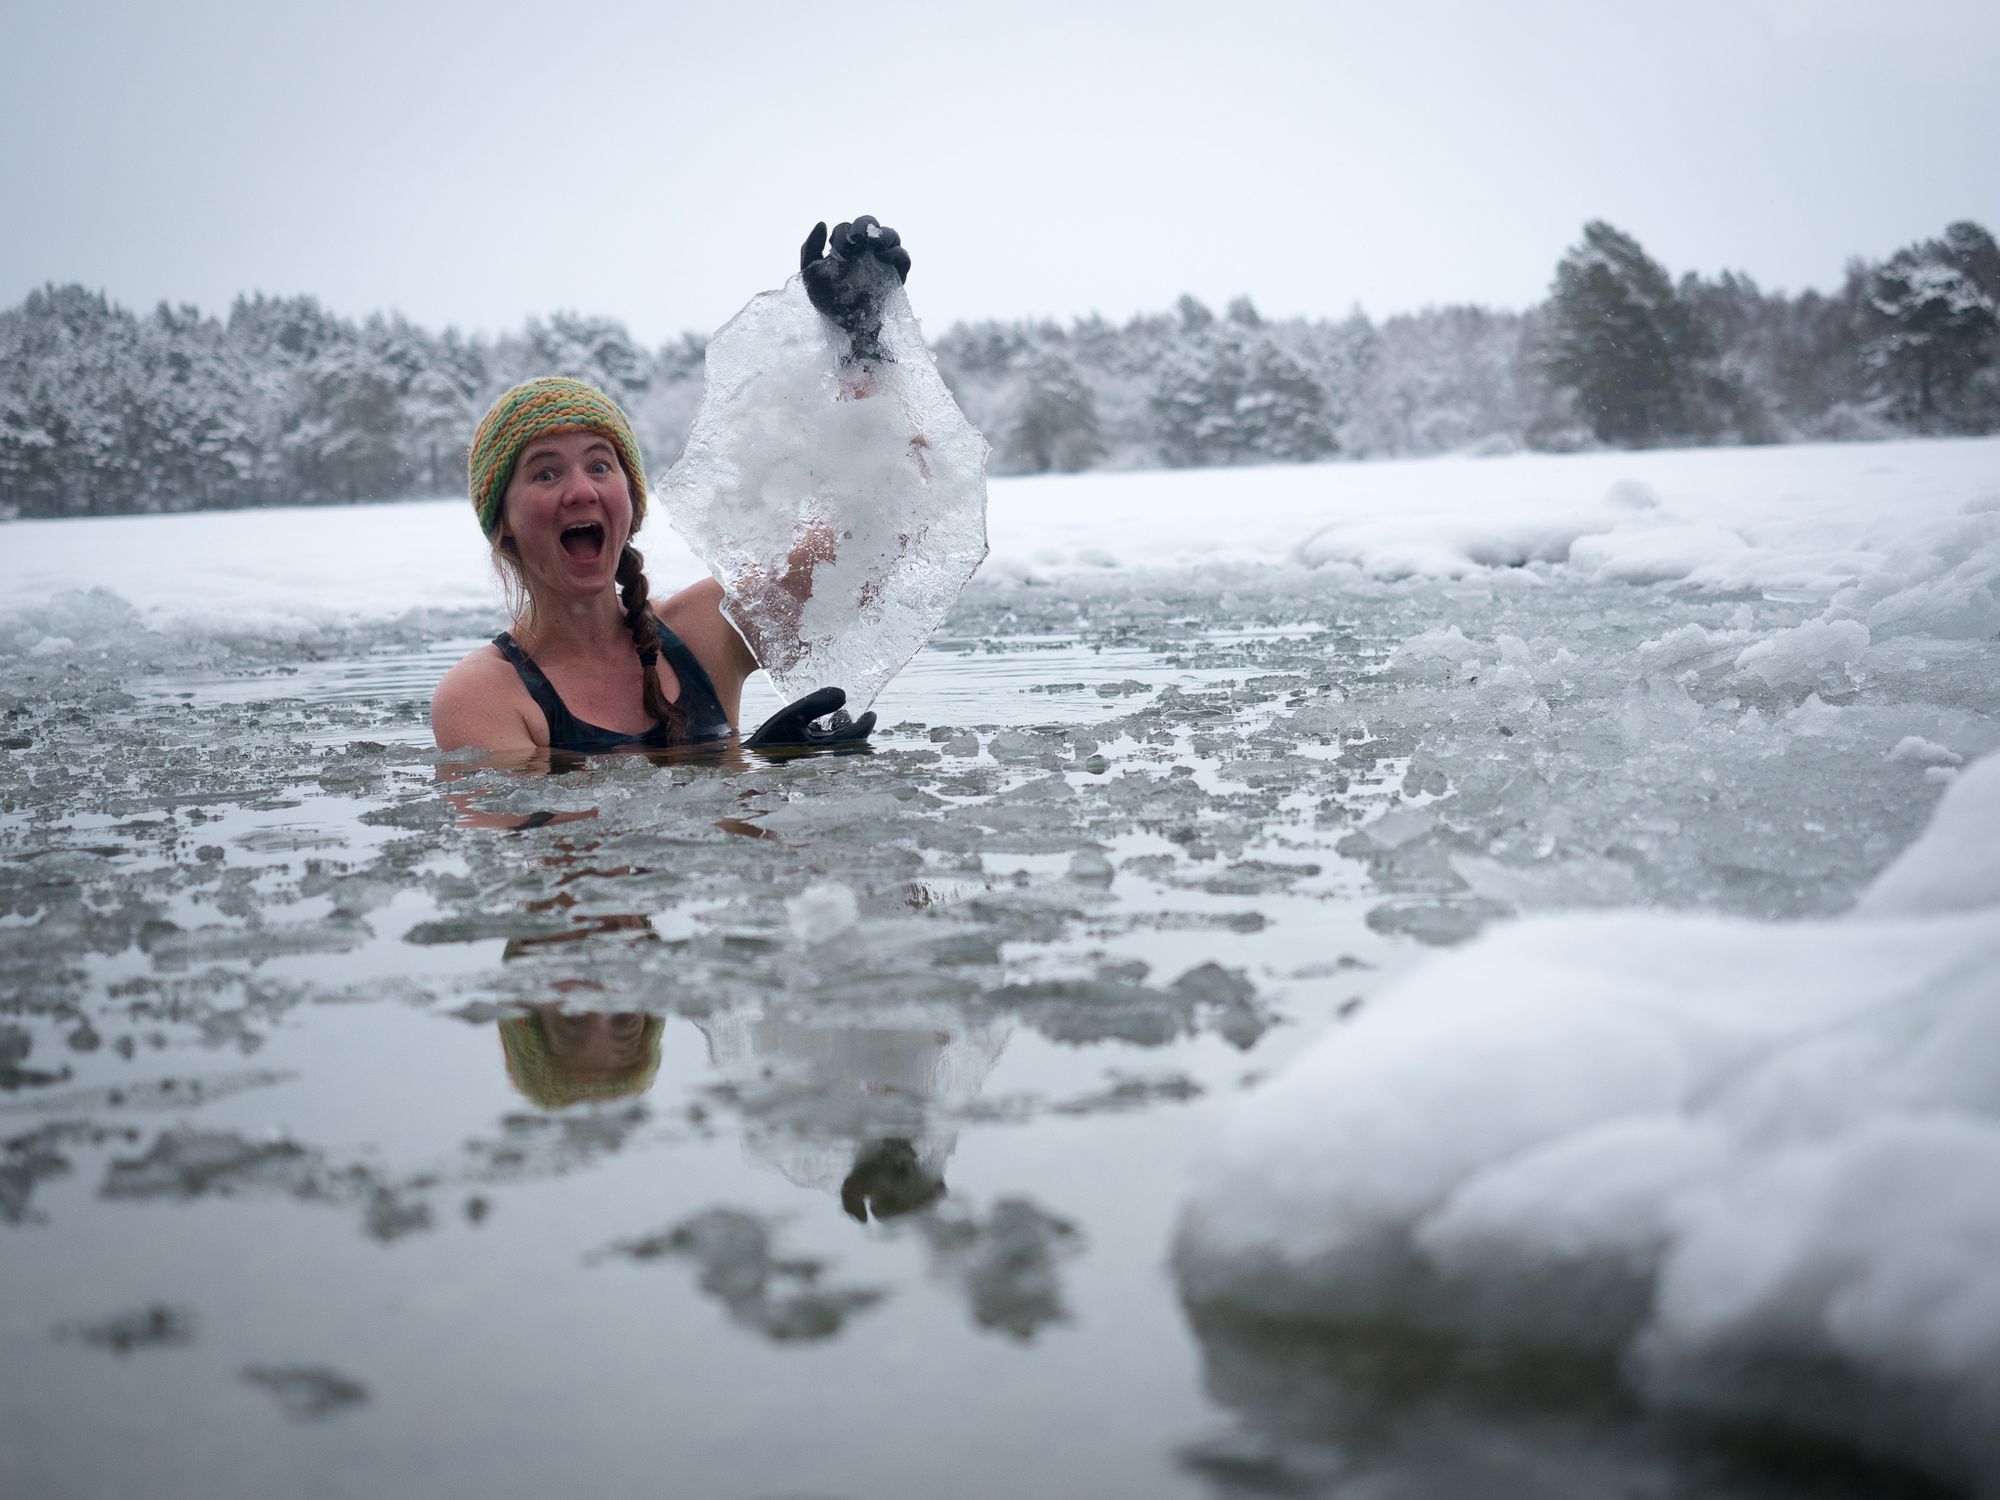 A woman goes ice swimming in a lake surrounded by forest